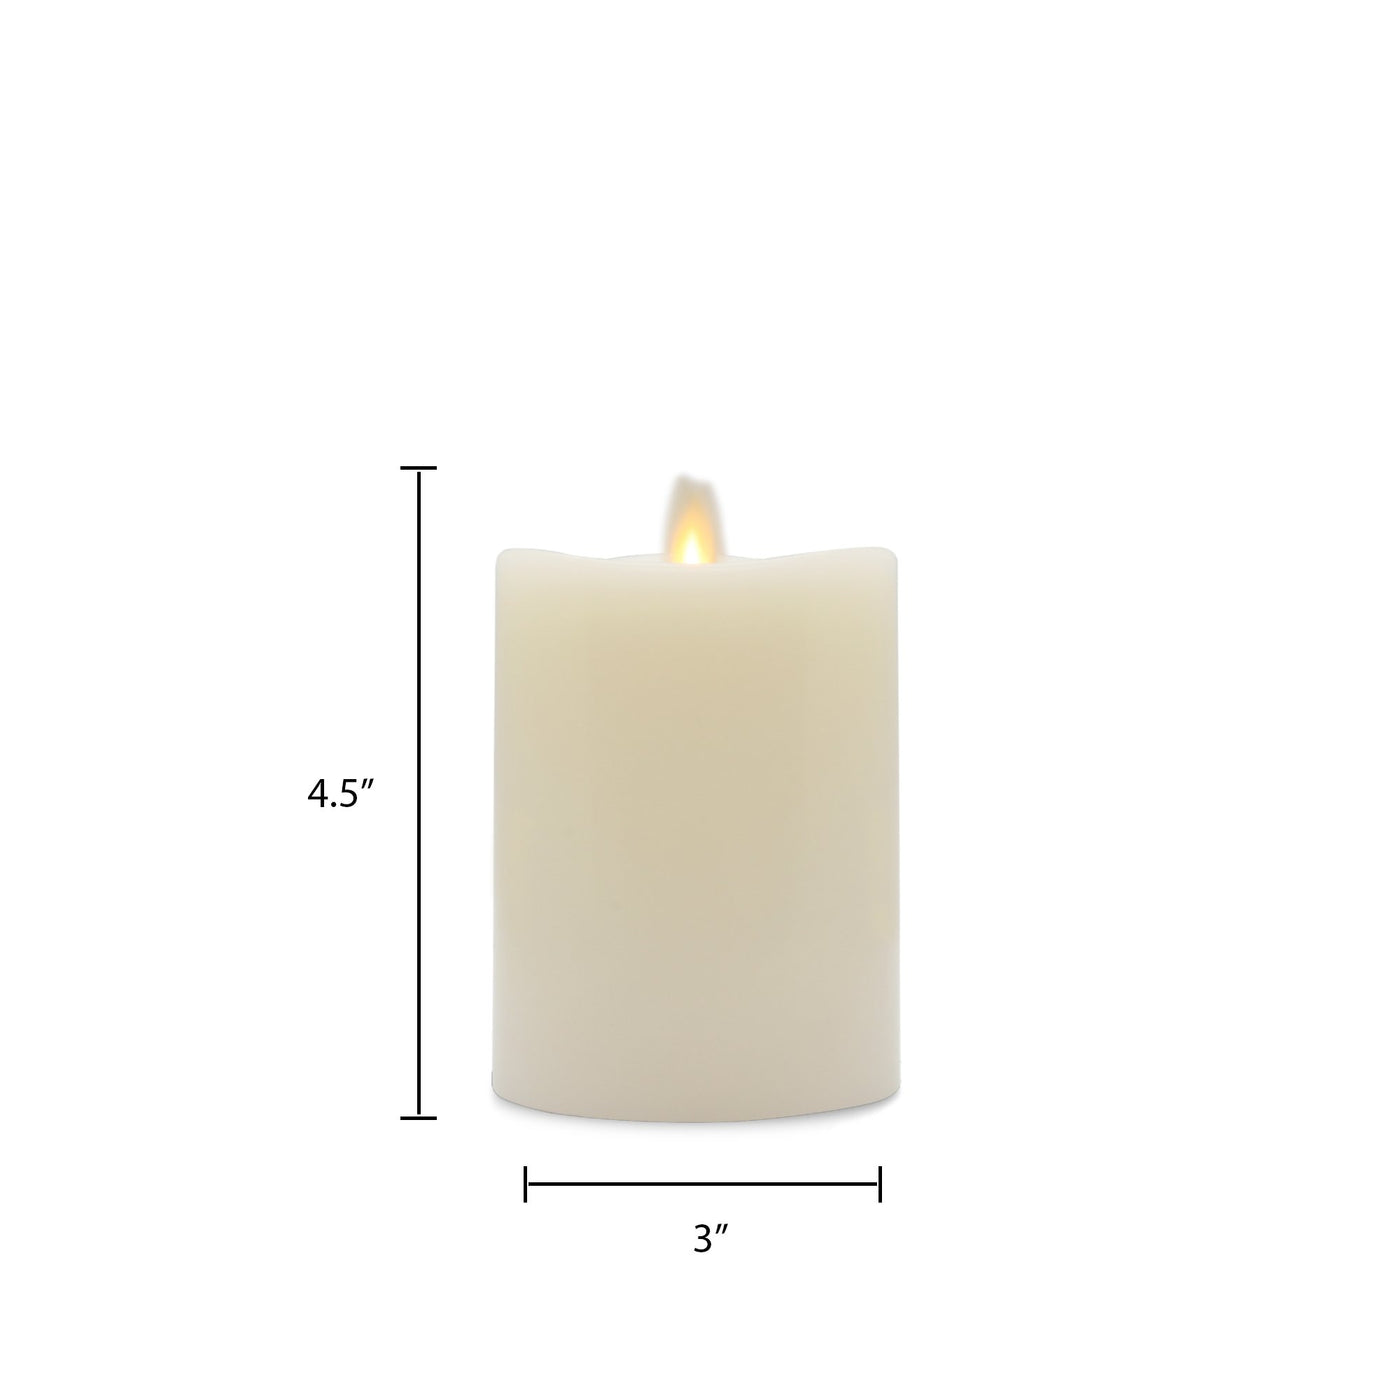 Matchless Candle Co. Indoor LED Candle - 7.6 x 11.4cm